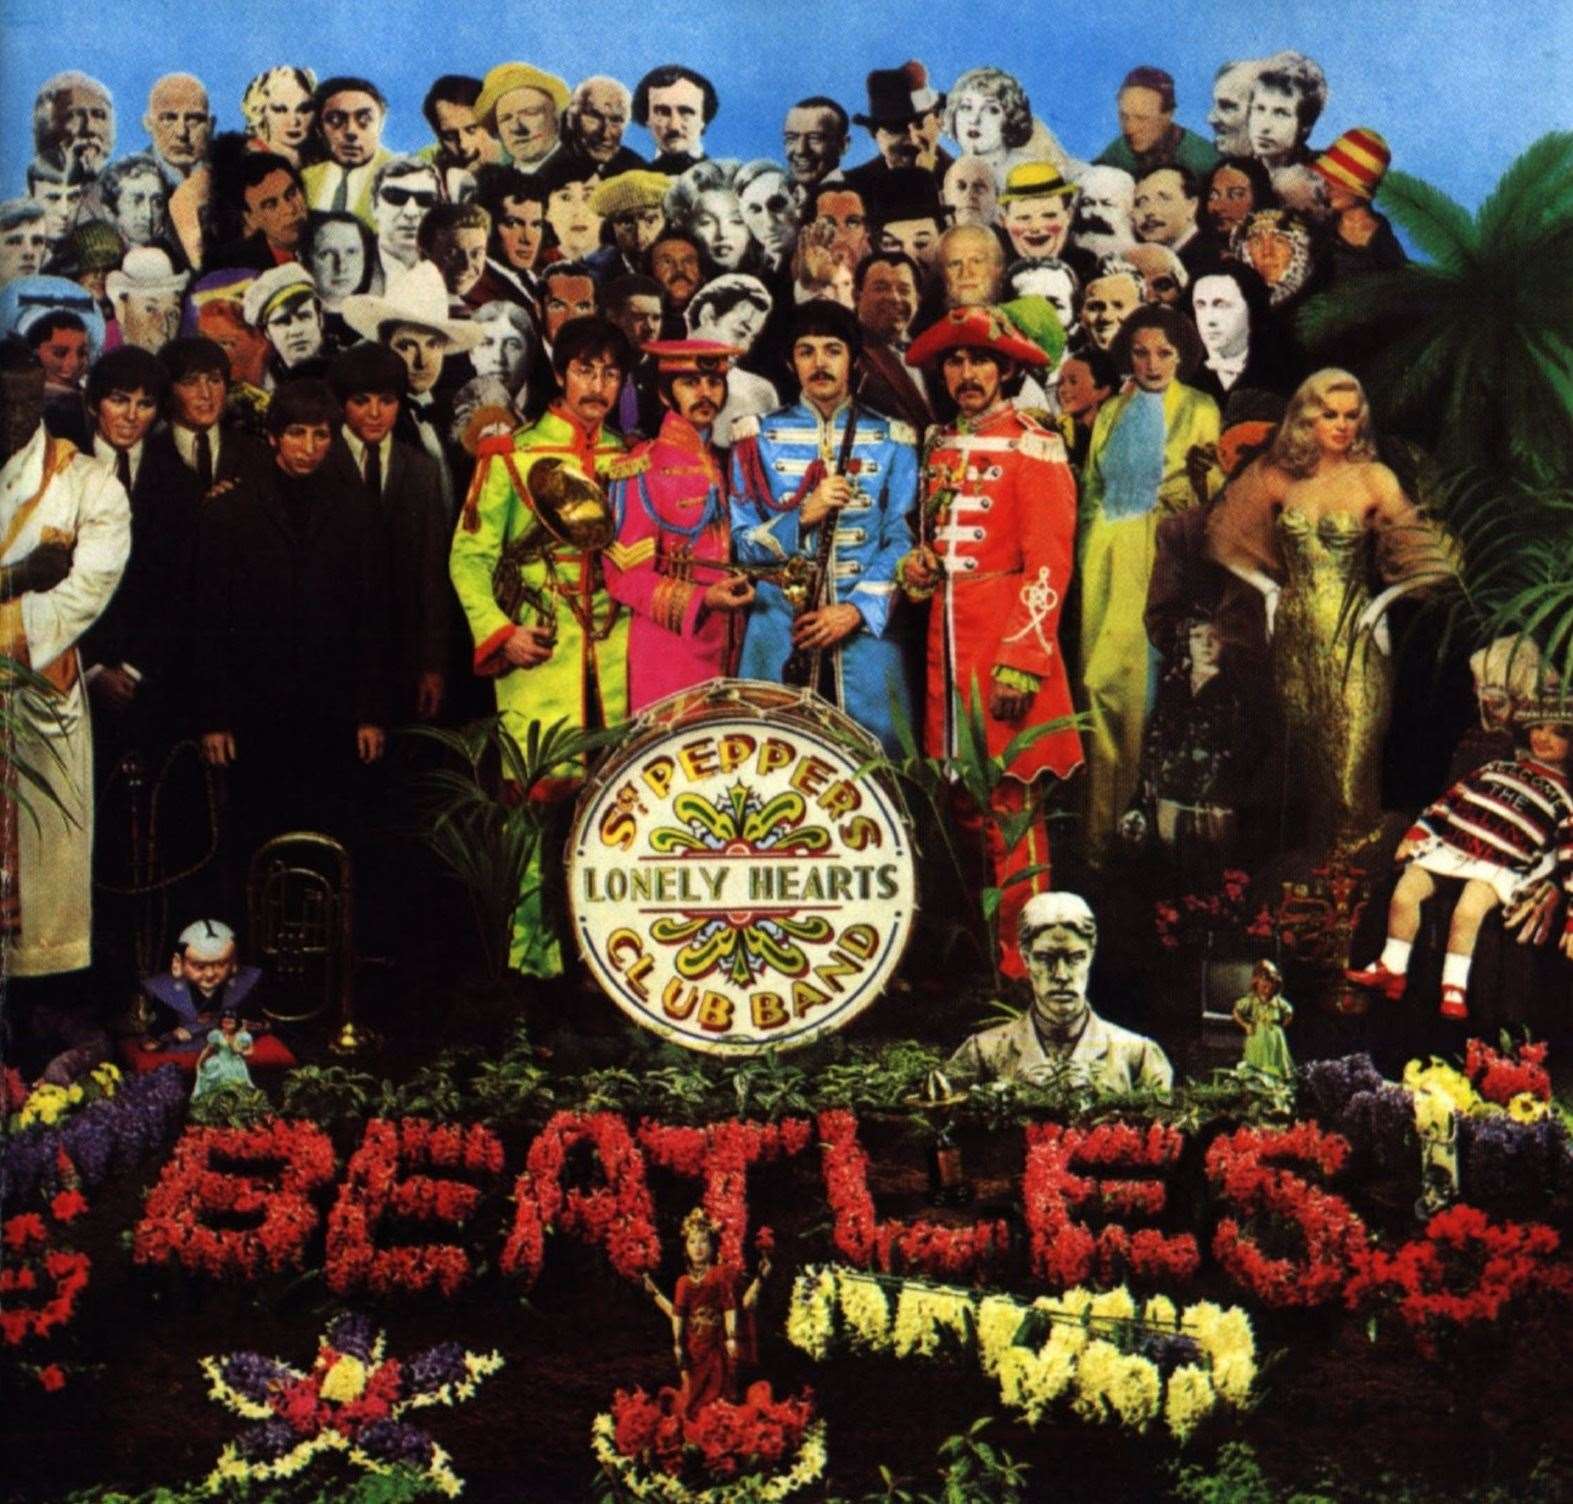 The Beatles' iconic Sgt Pepper’s Lonely Hearts Club Band album cover designed by Dartford-born Sir Peter Blake